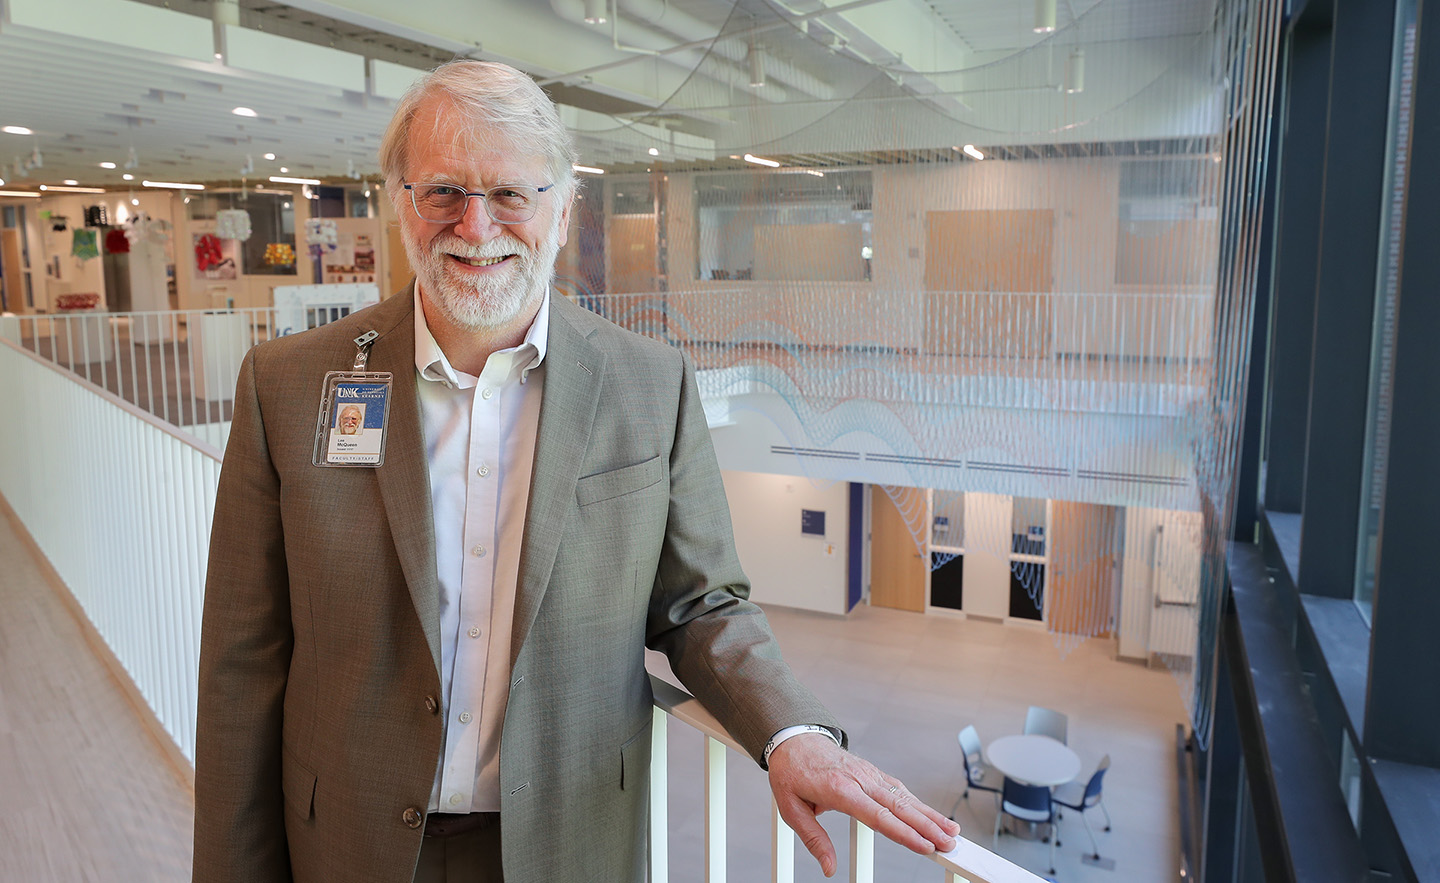 As director of UNK Facilities Management and Planning, Lee McQueen played a major part in numerous capital improvement projects on campus, including the recent construction of Discovery Hall, a state-of-the-art STEM building that opened in fall 2020. (Photo by Erika Pritchard, UNK Communications)